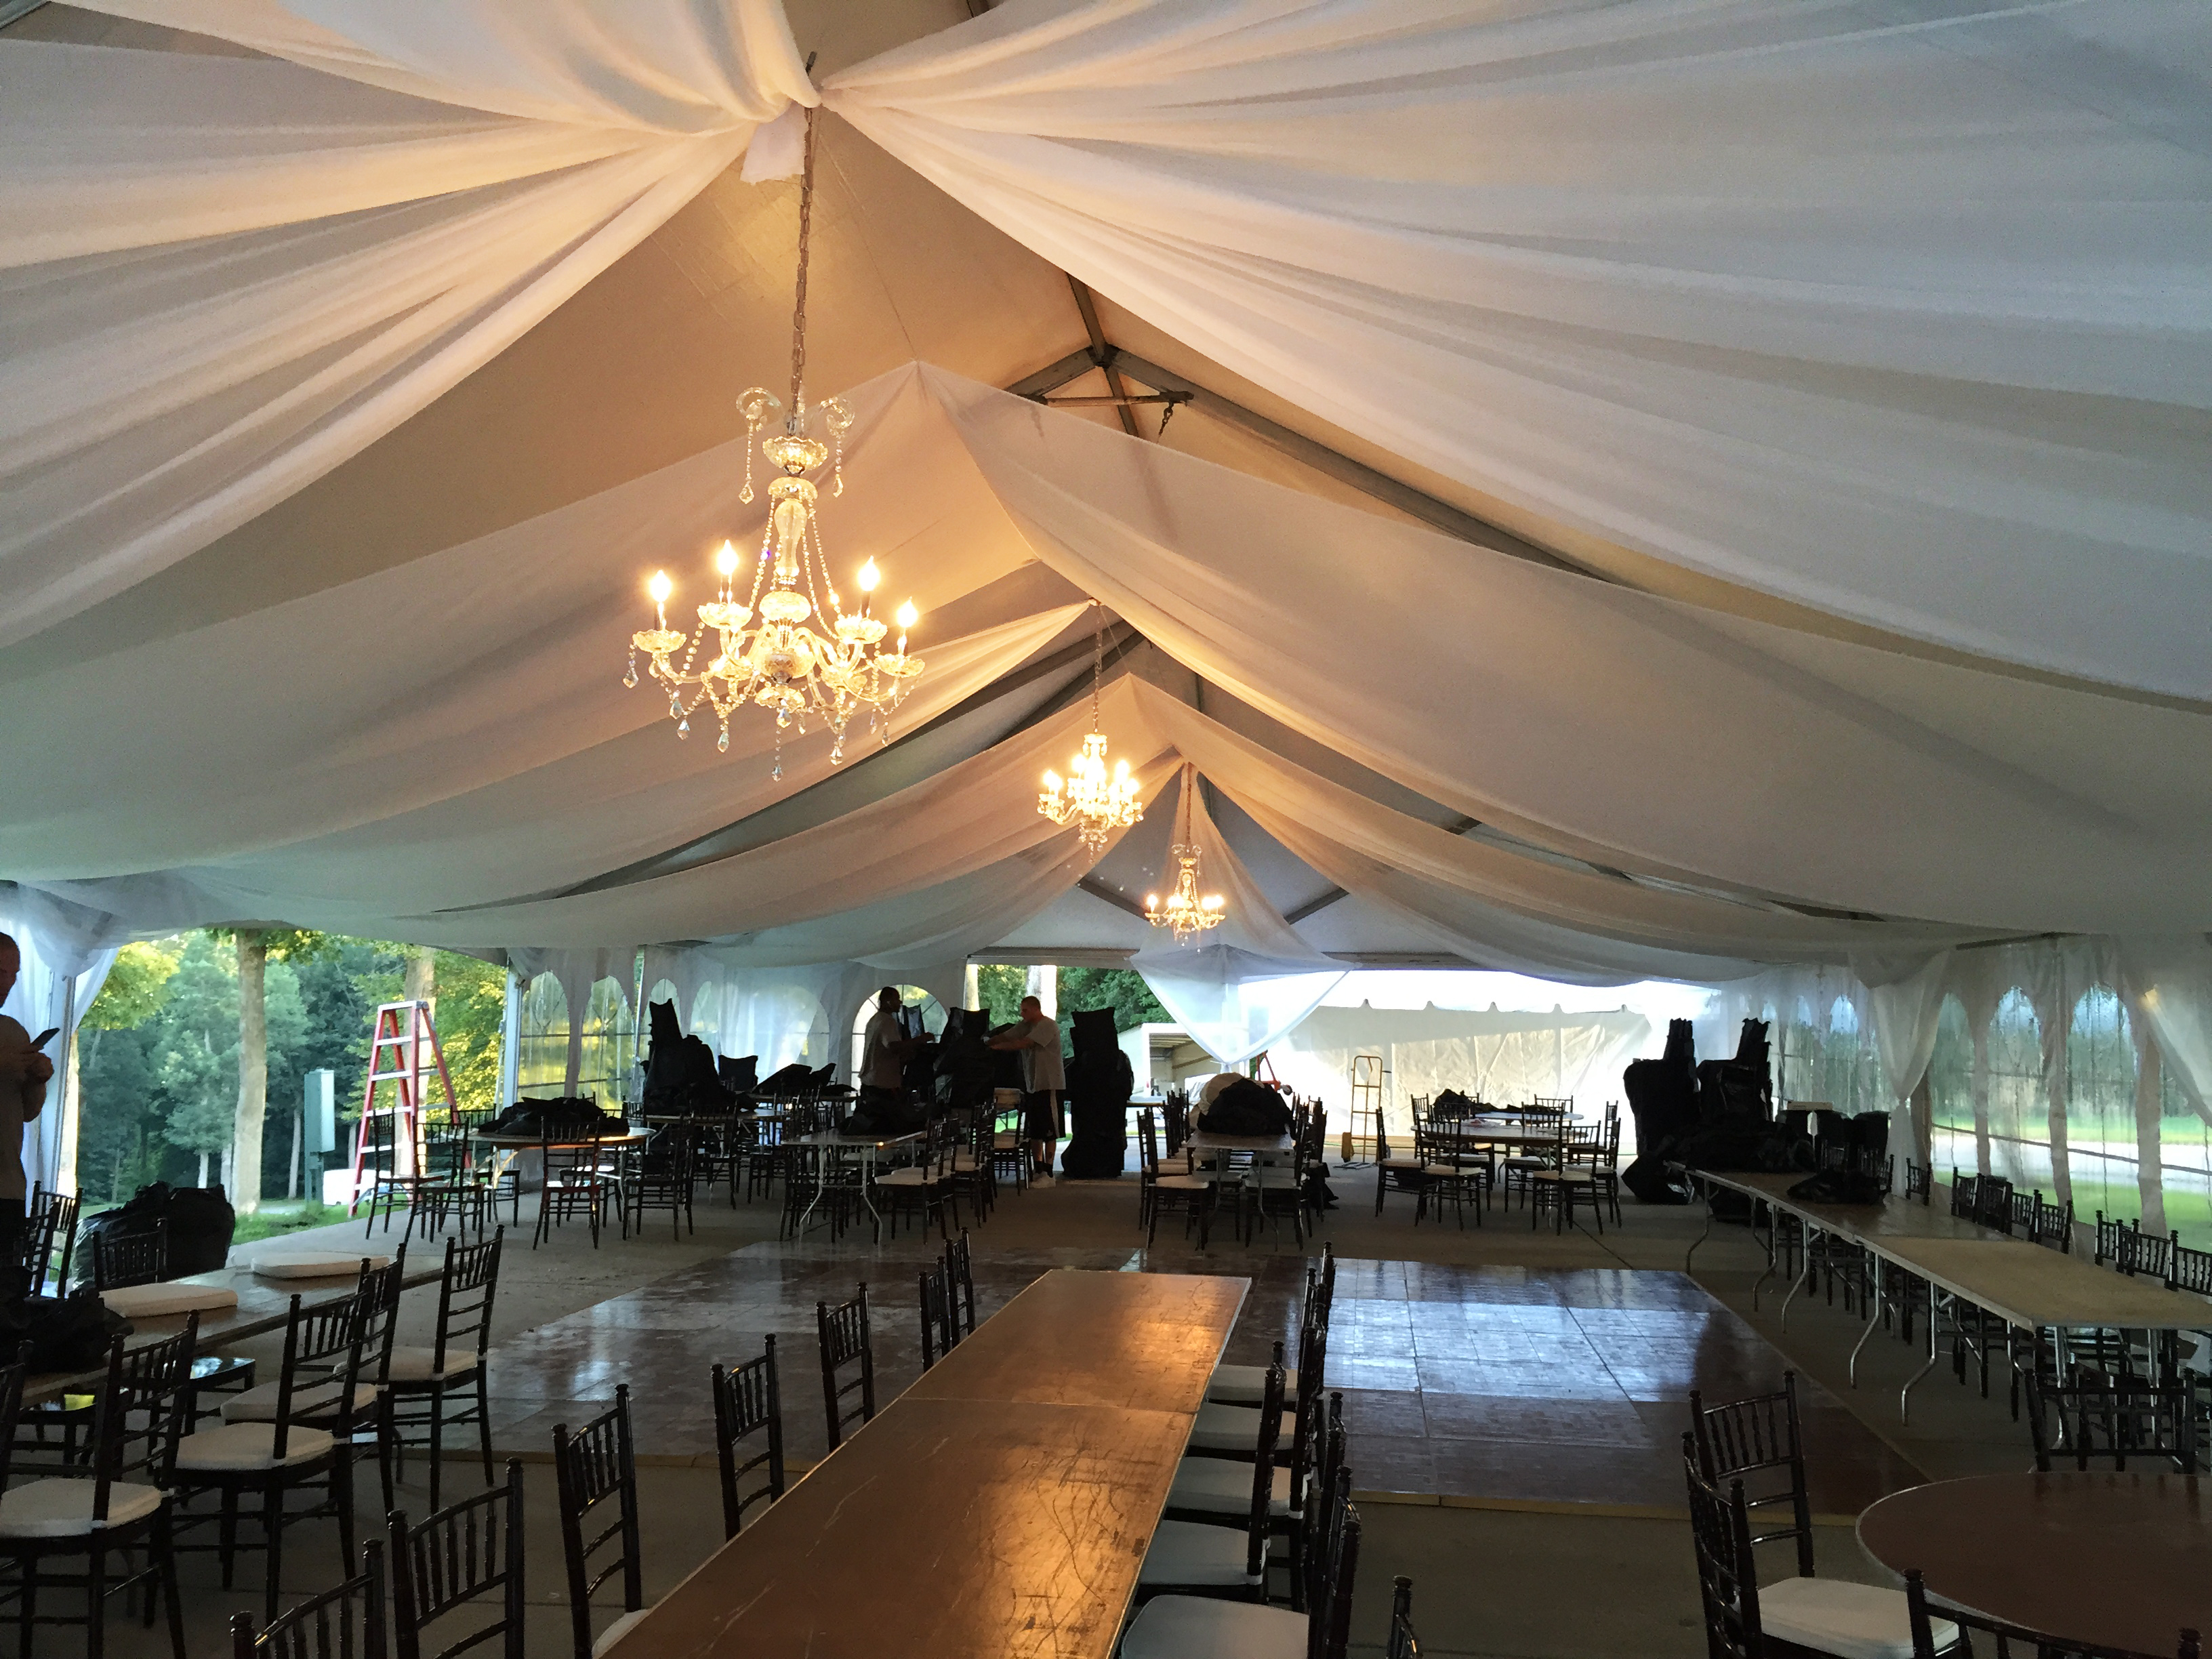 Wedding tent with chandeliers and sheer draping in Illinois